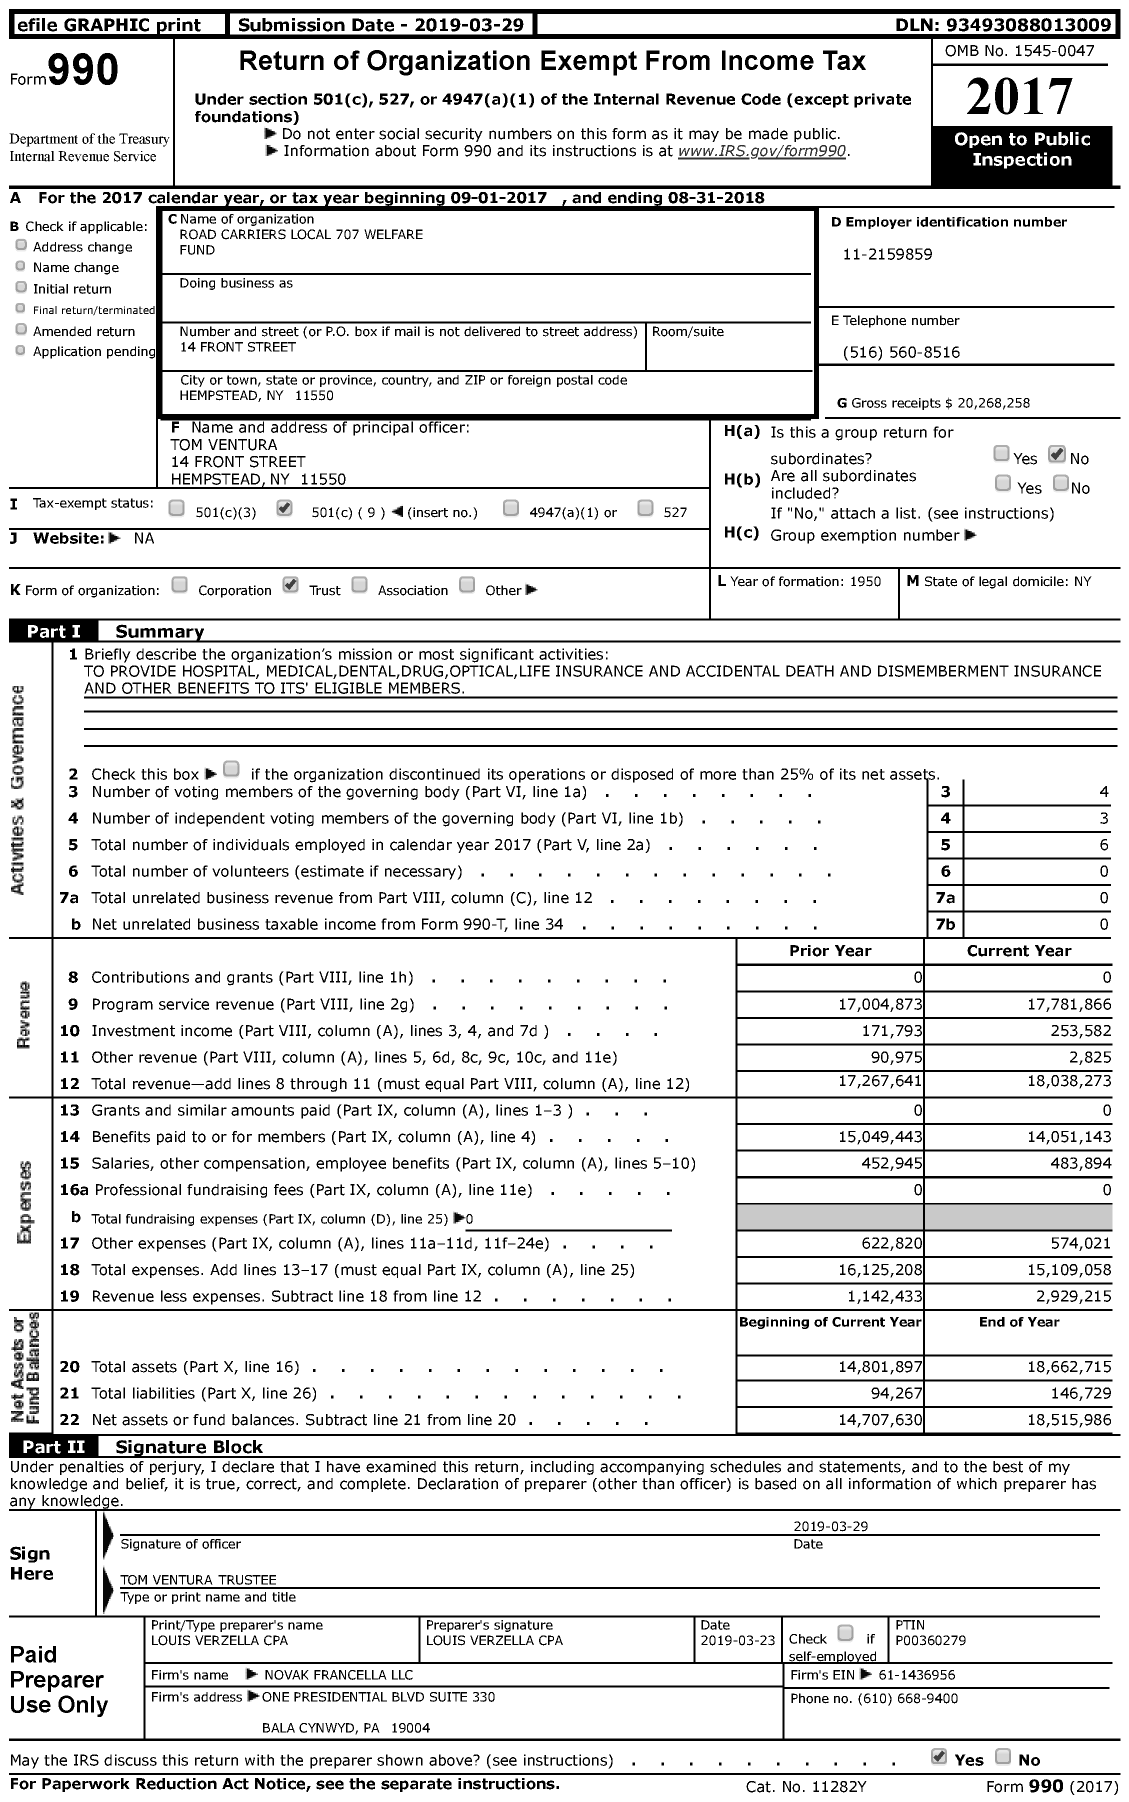 Image of first page of 2017 Form 990 for Road Carriers Local 707 Welfare Fund